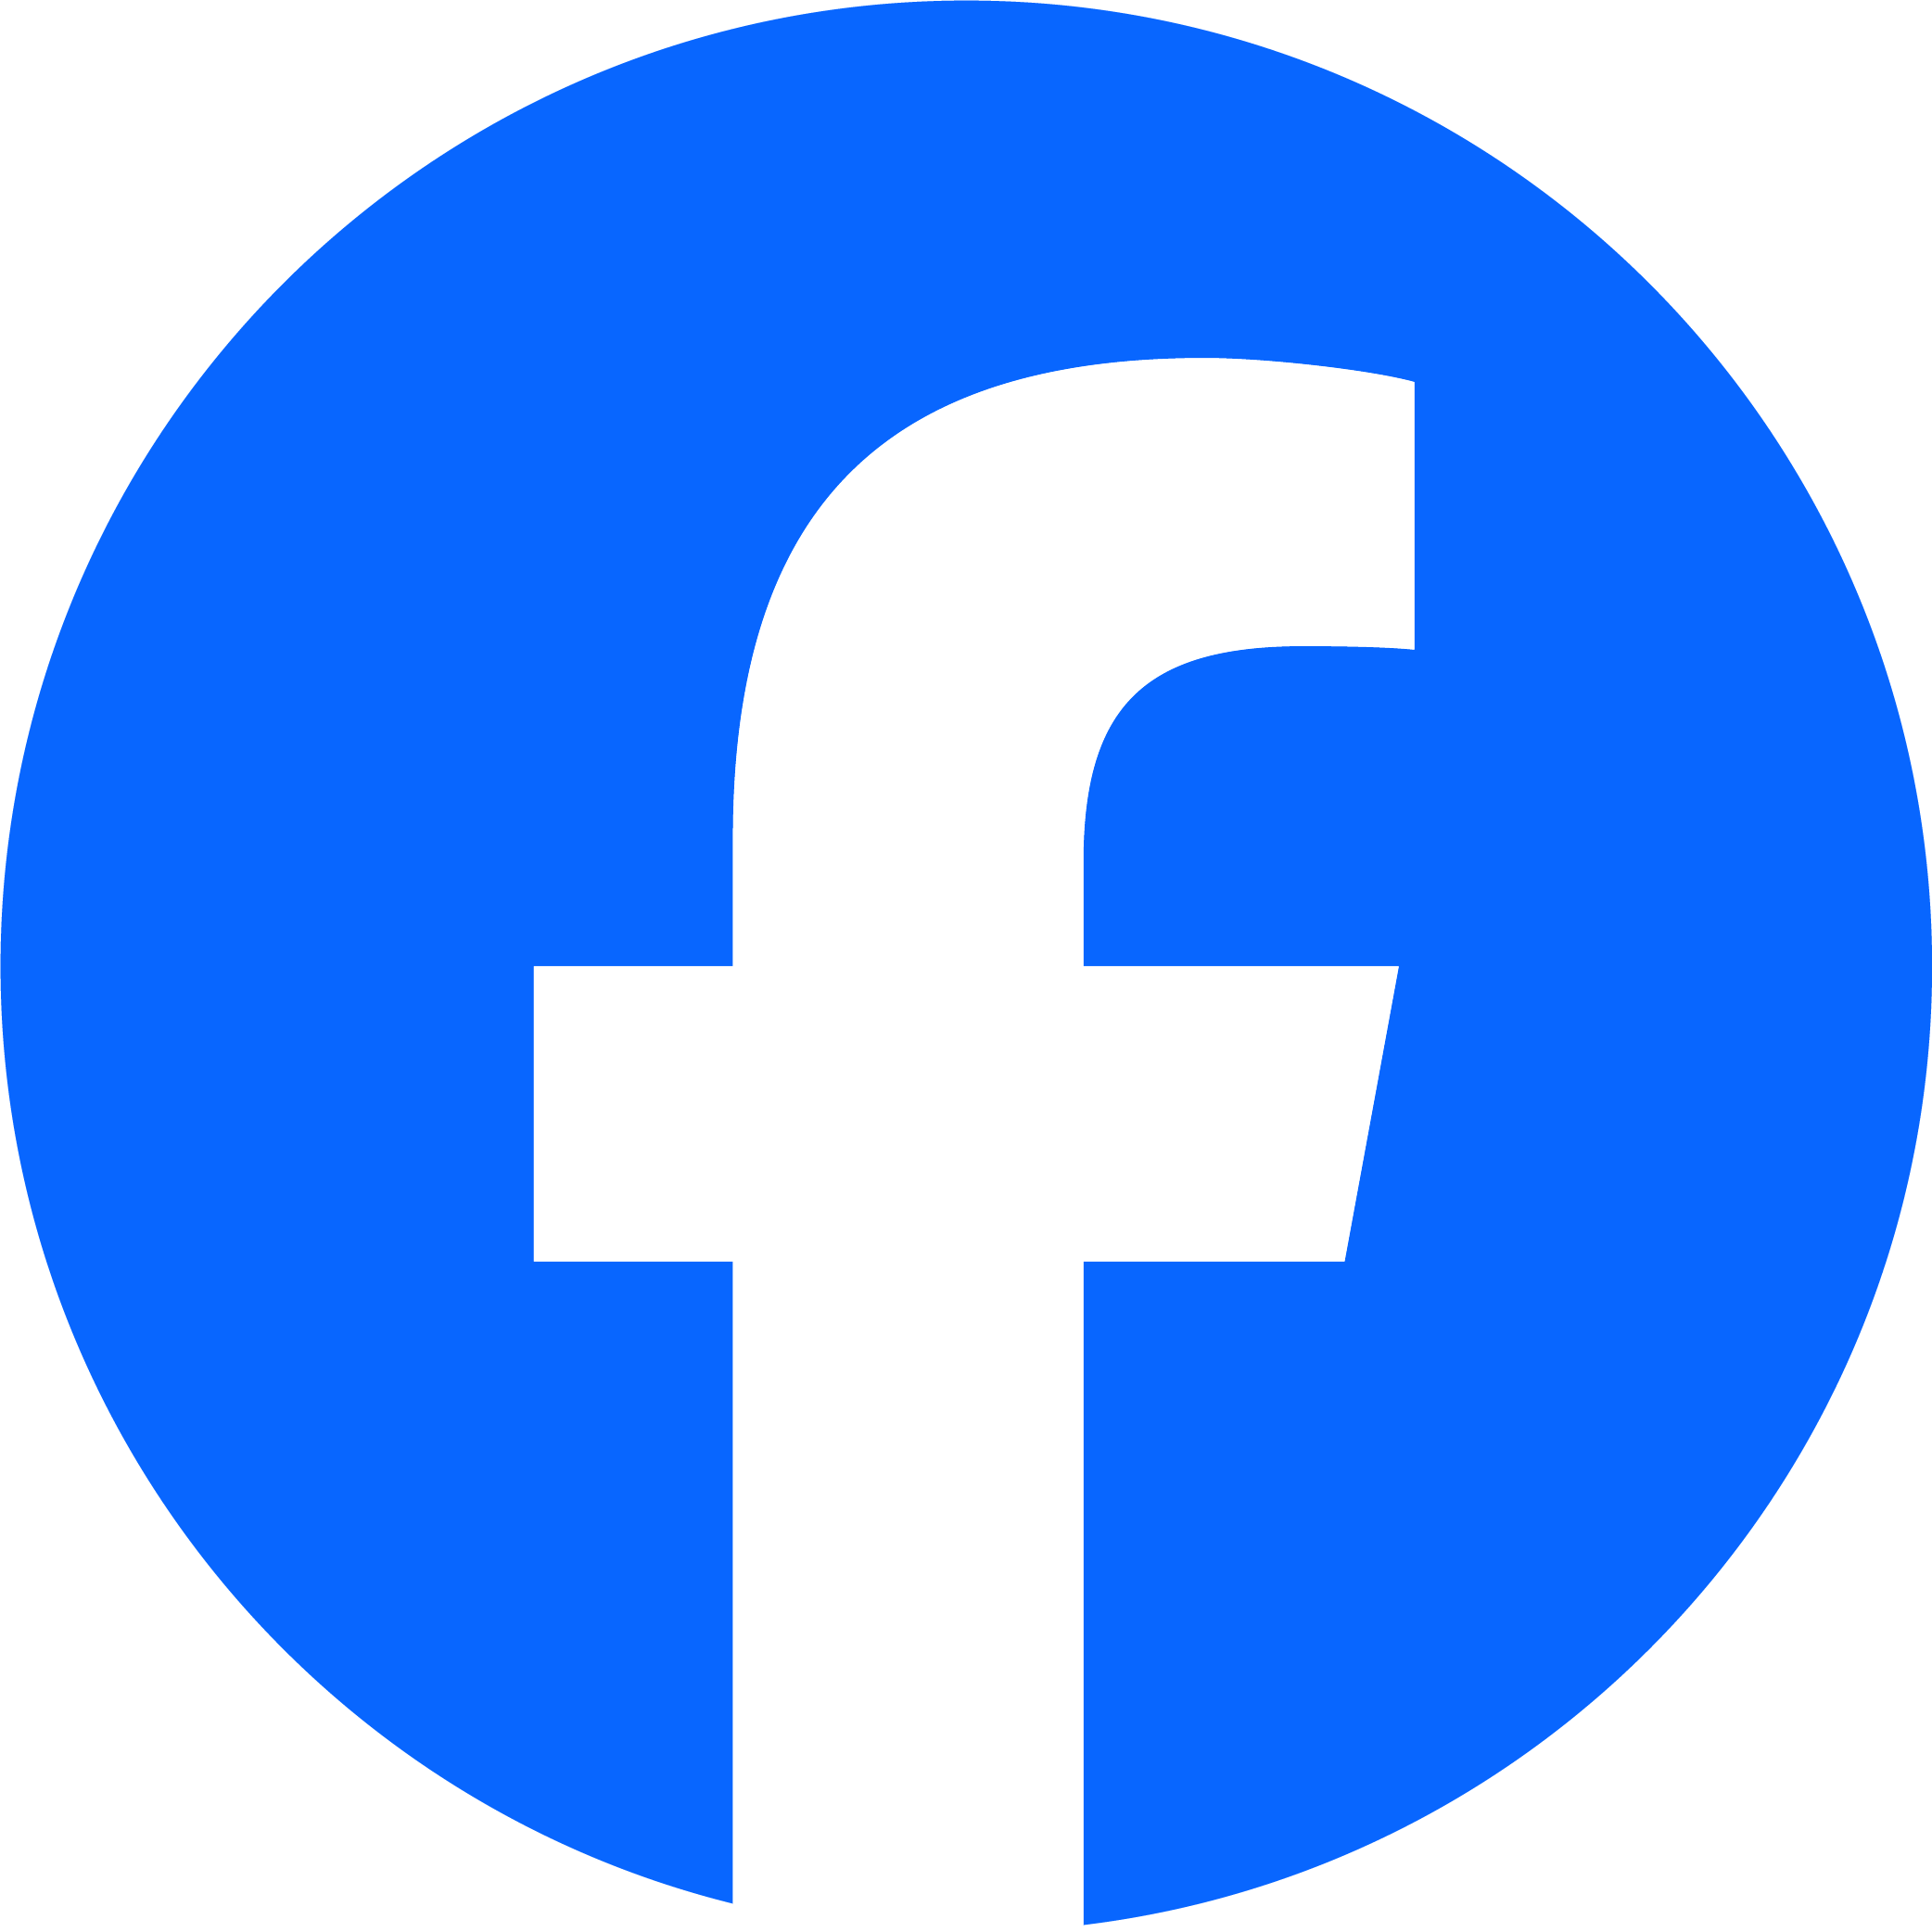 A White, Lowercase "f" Logo On A Blue Circular Background, Representing The Facebook Logo.